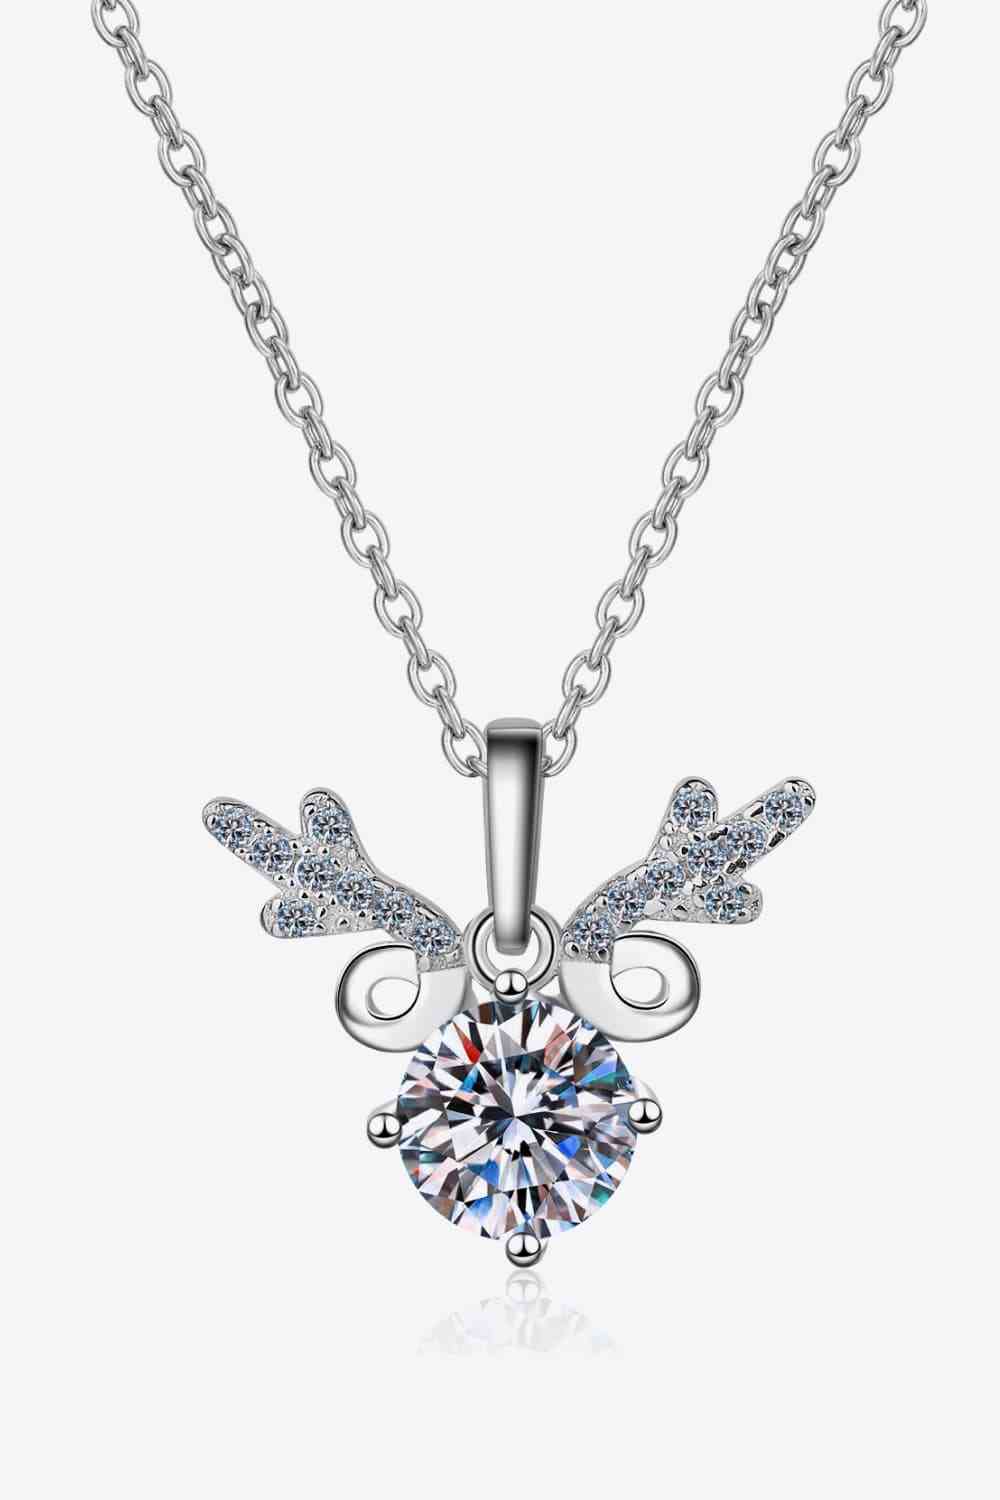 1 Carat Moissanite 925 Sterling Silver Necklace 💜